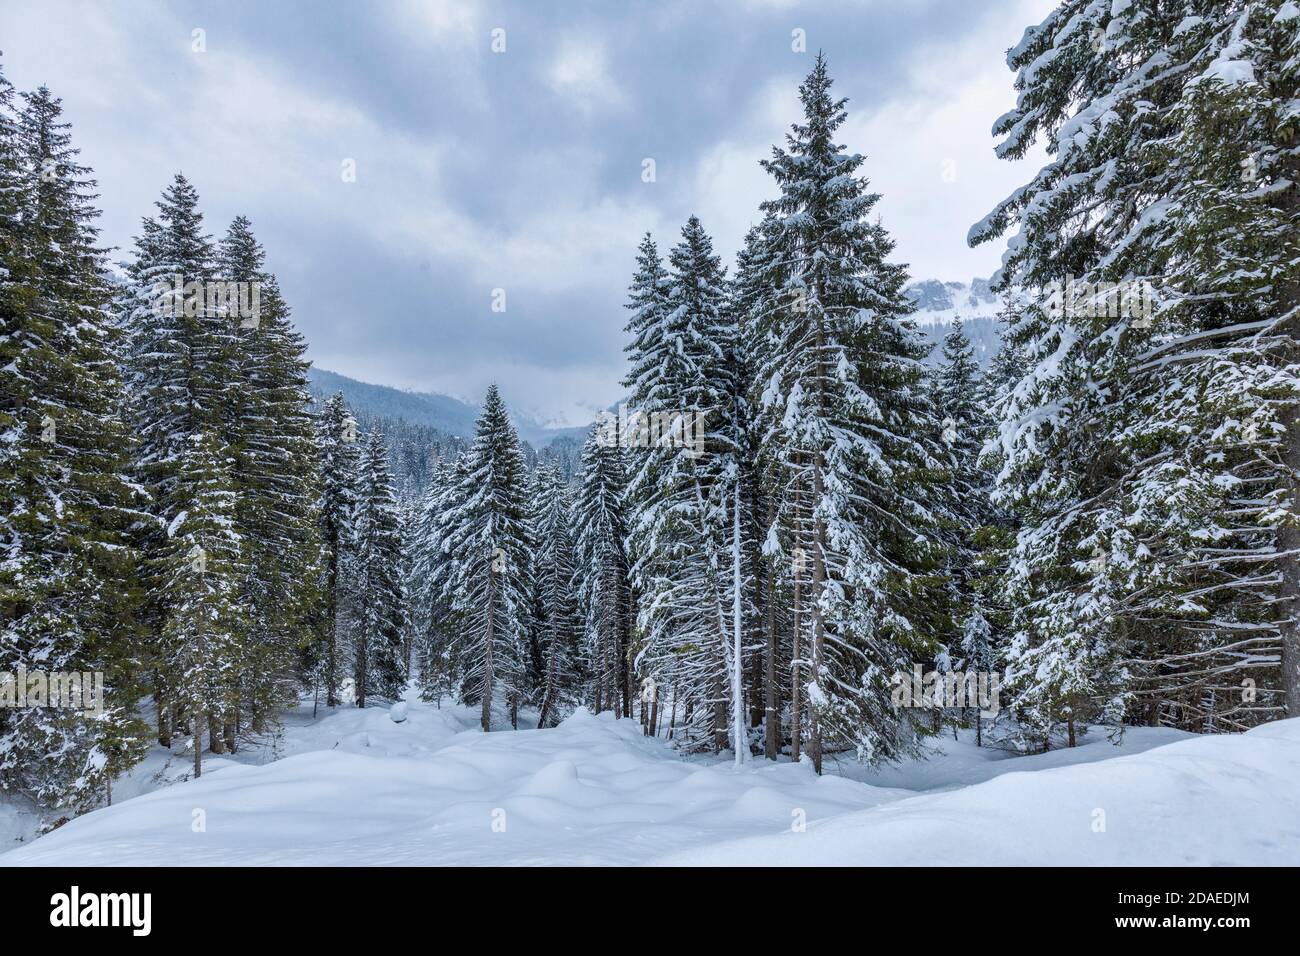 forest of firs covered by snow after a snowstorm, winter landscape, Paneveggio, Dolomites, Predazzo, Trentino, Italy Stock Photo